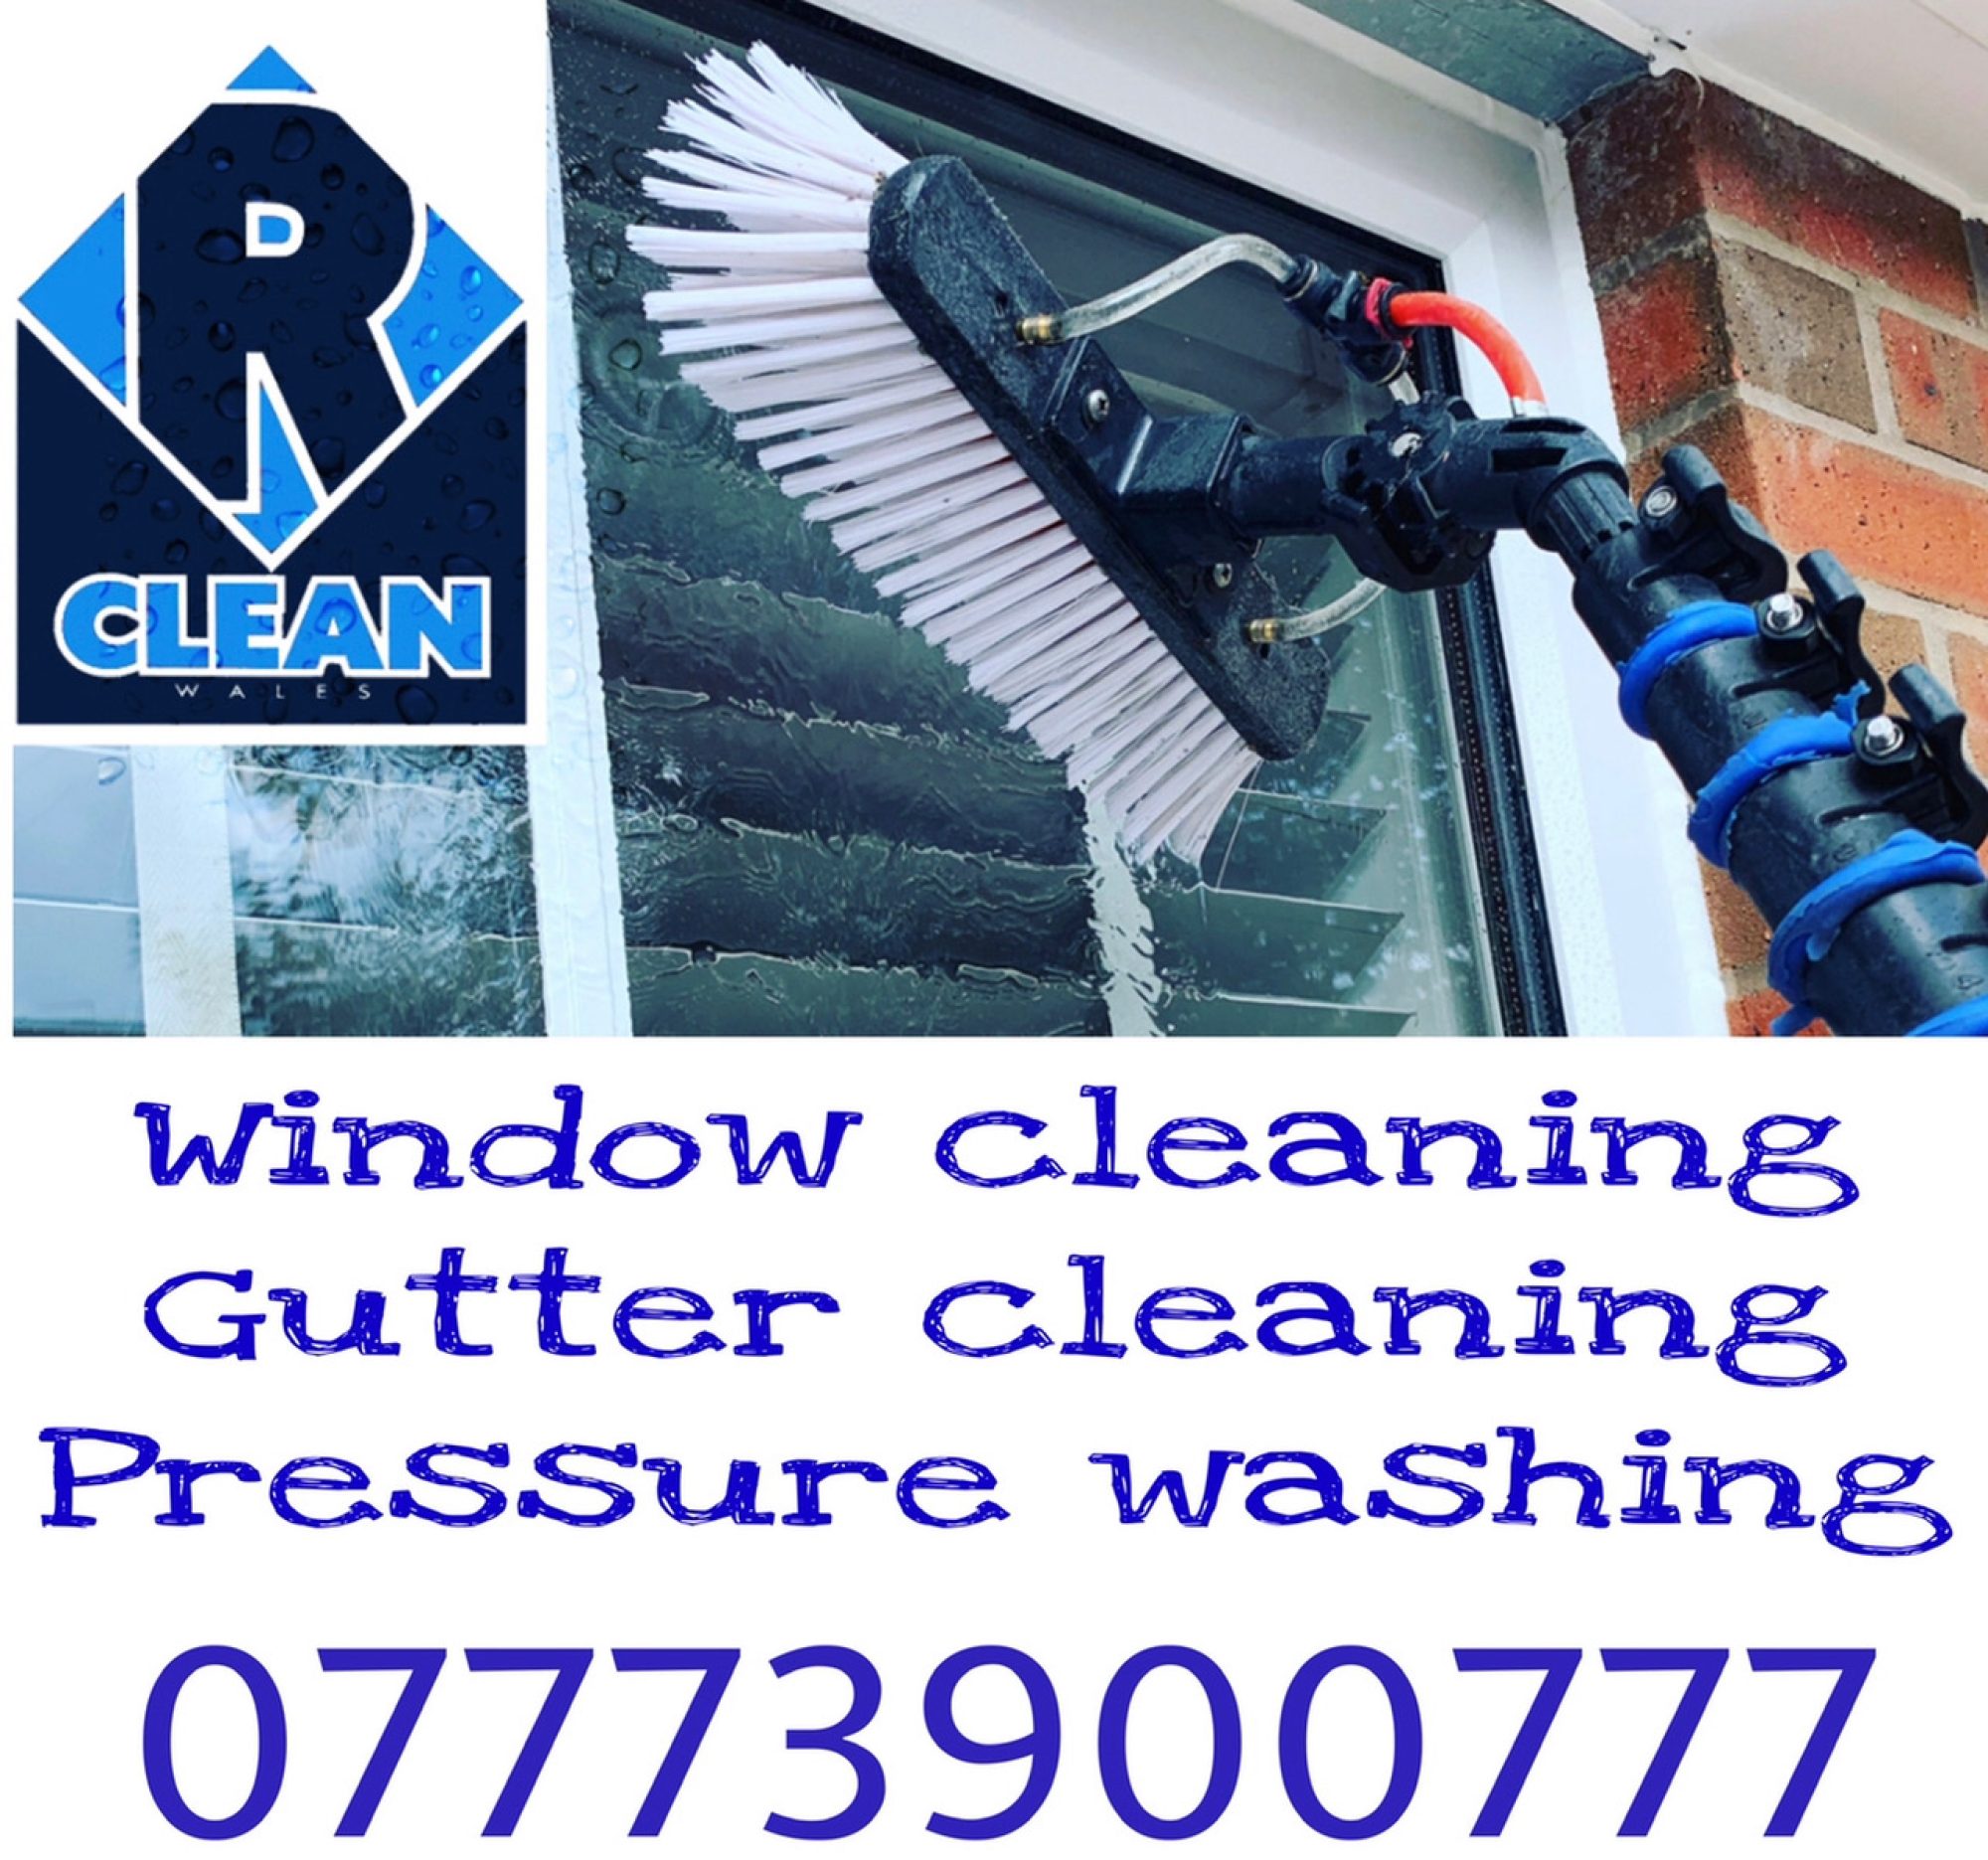 window cleaning gutter cleaning and pressure washing